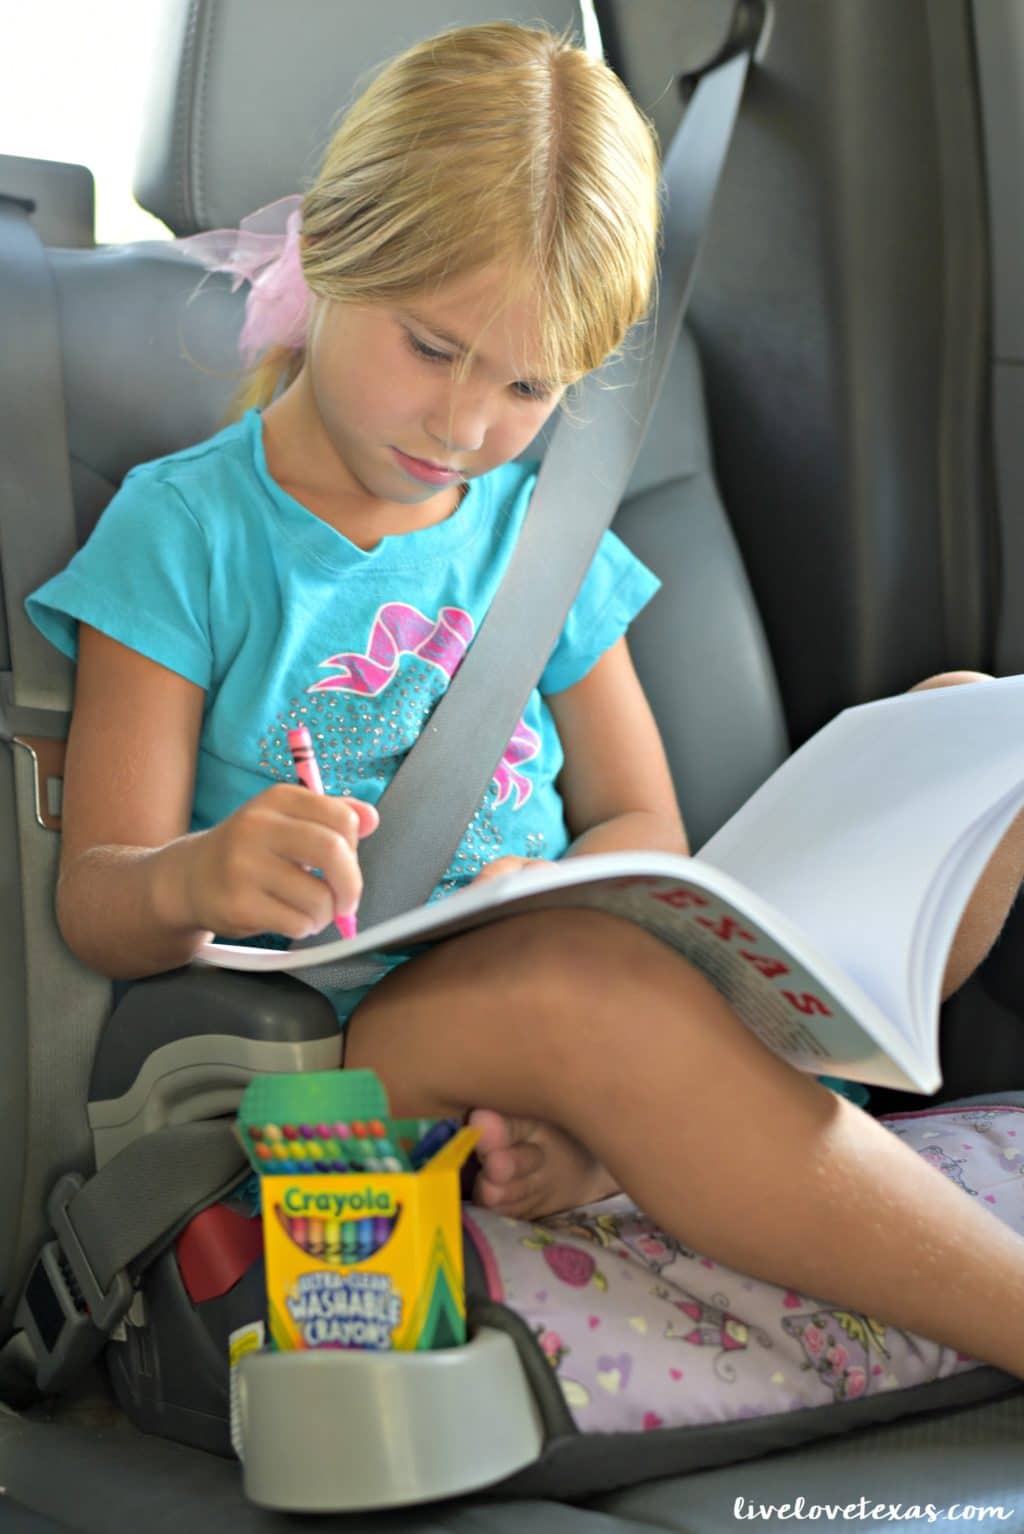 Tired of being asked, "Are we there yet?" Don't get trapped in the car without these 5 Road Trip Must Haves with Kids to Save Time and Your Sanity!